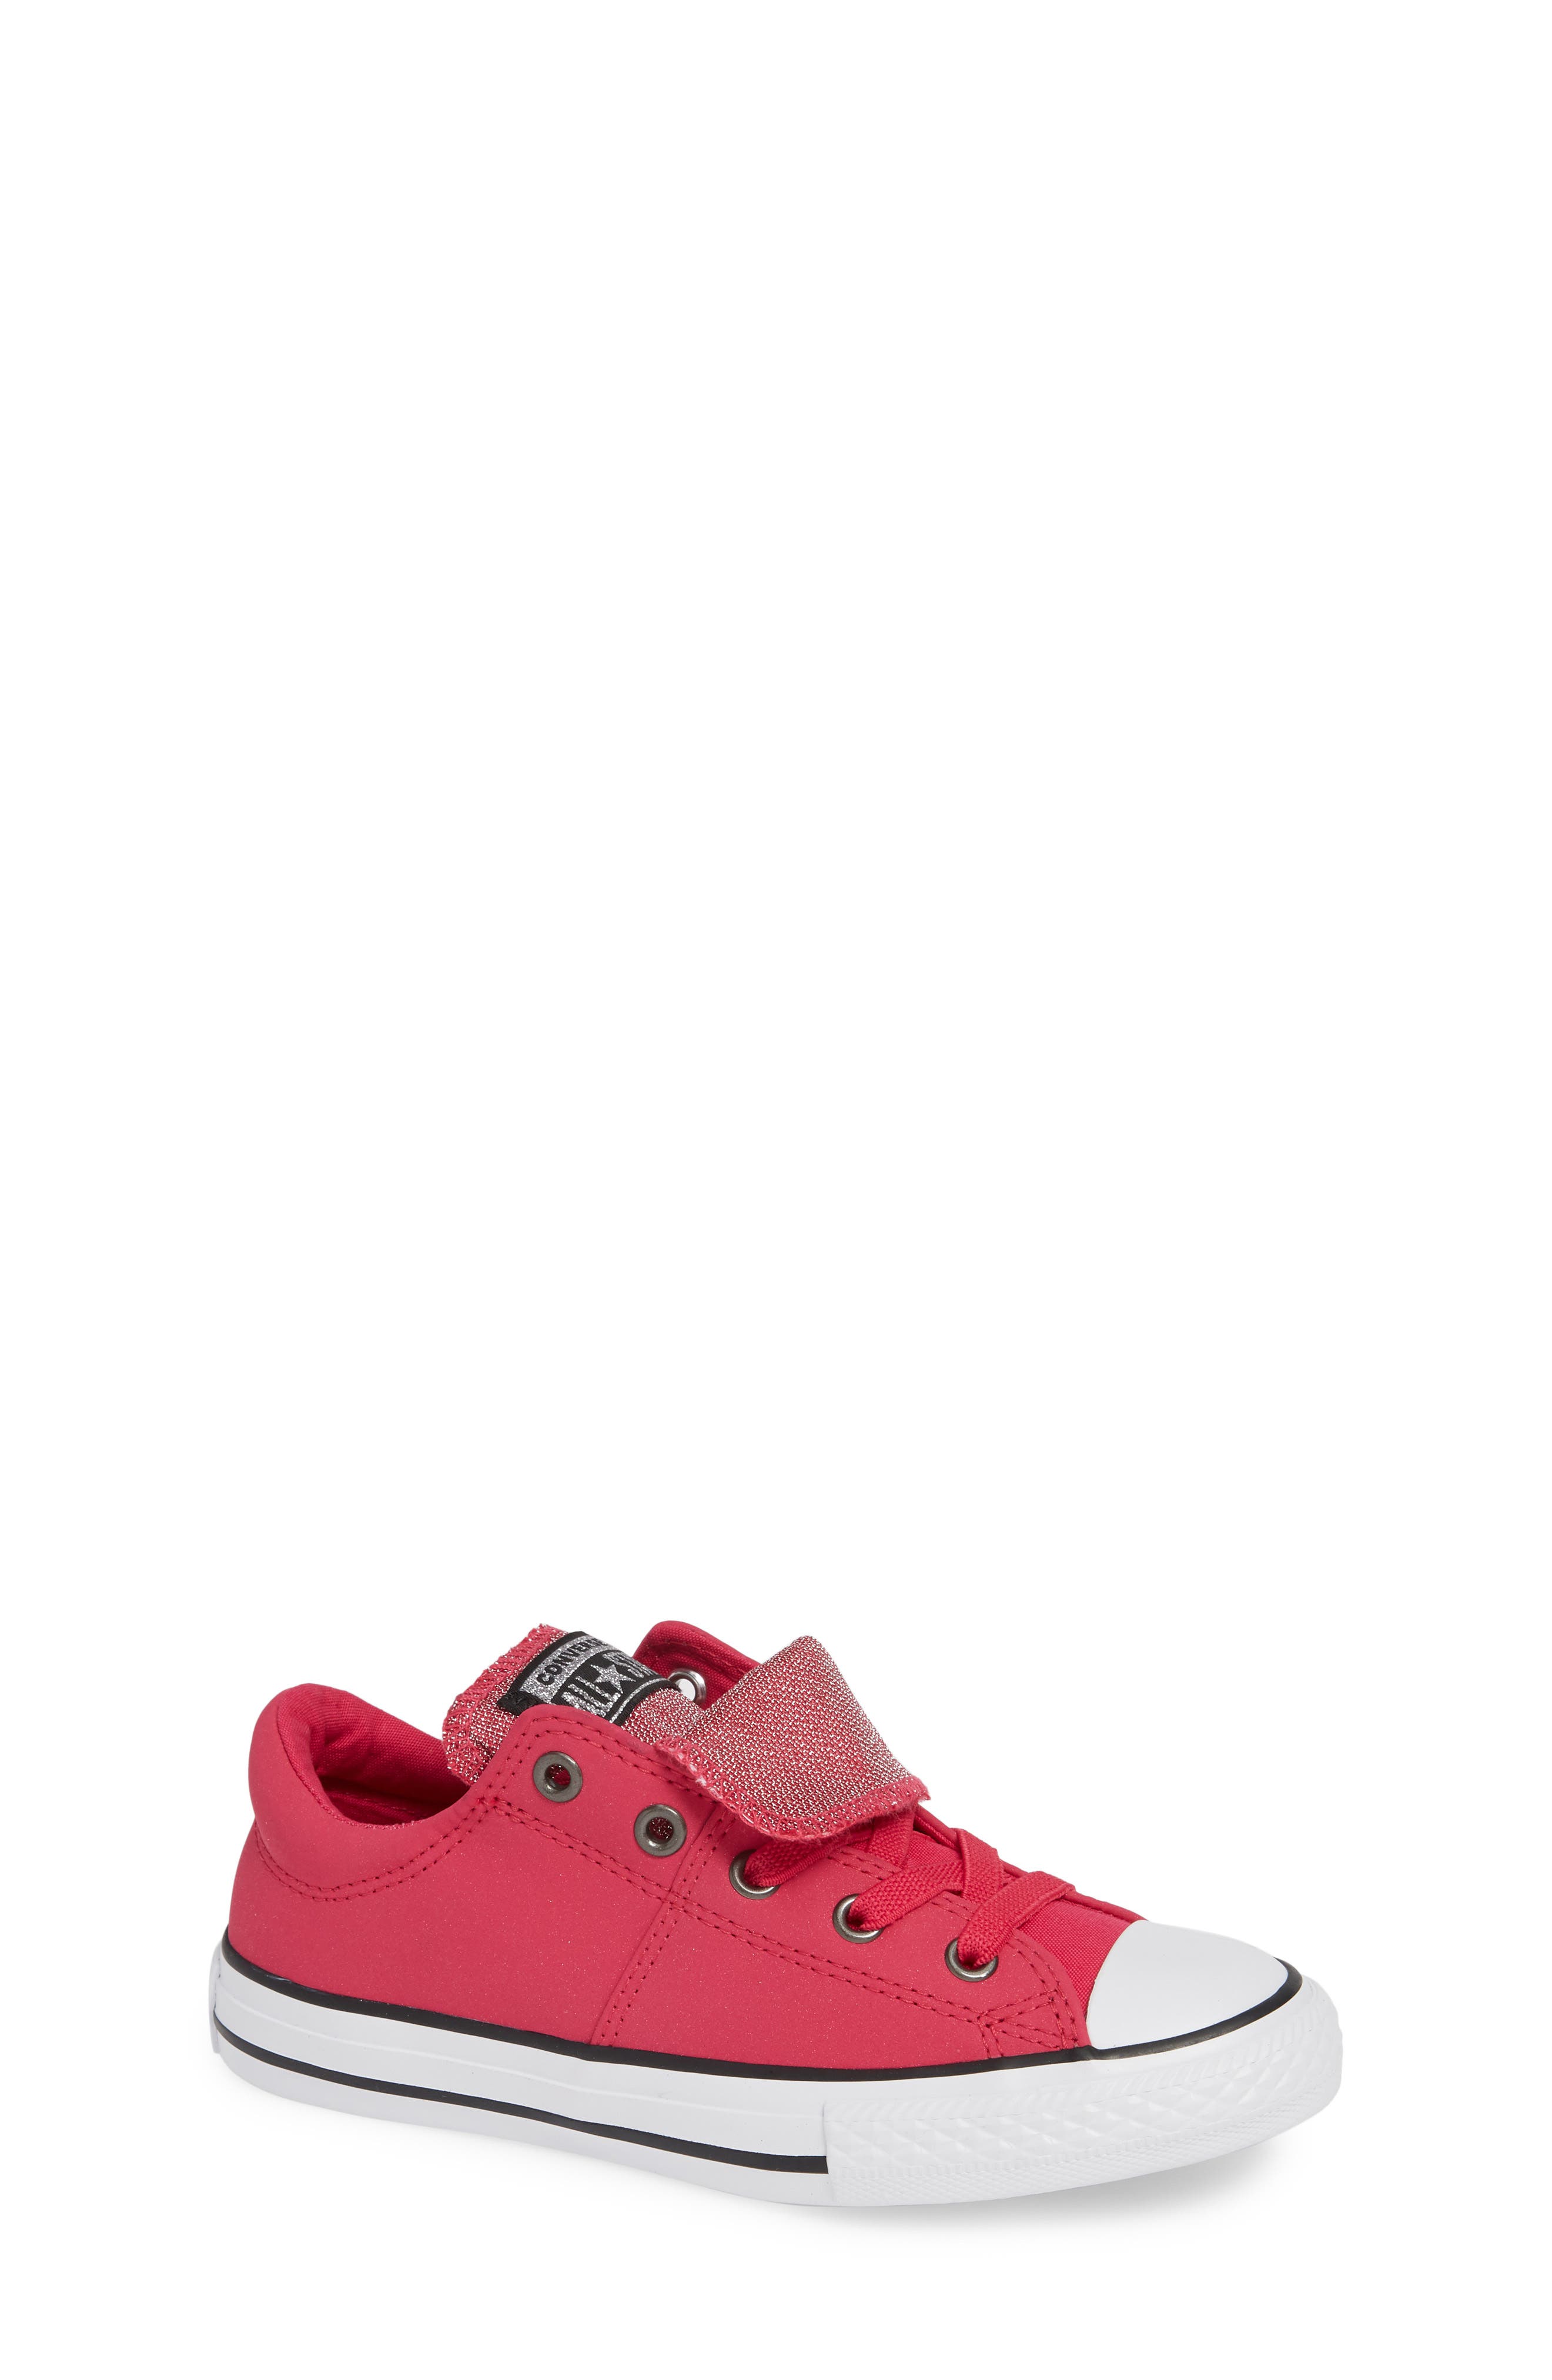 sparkling red converse